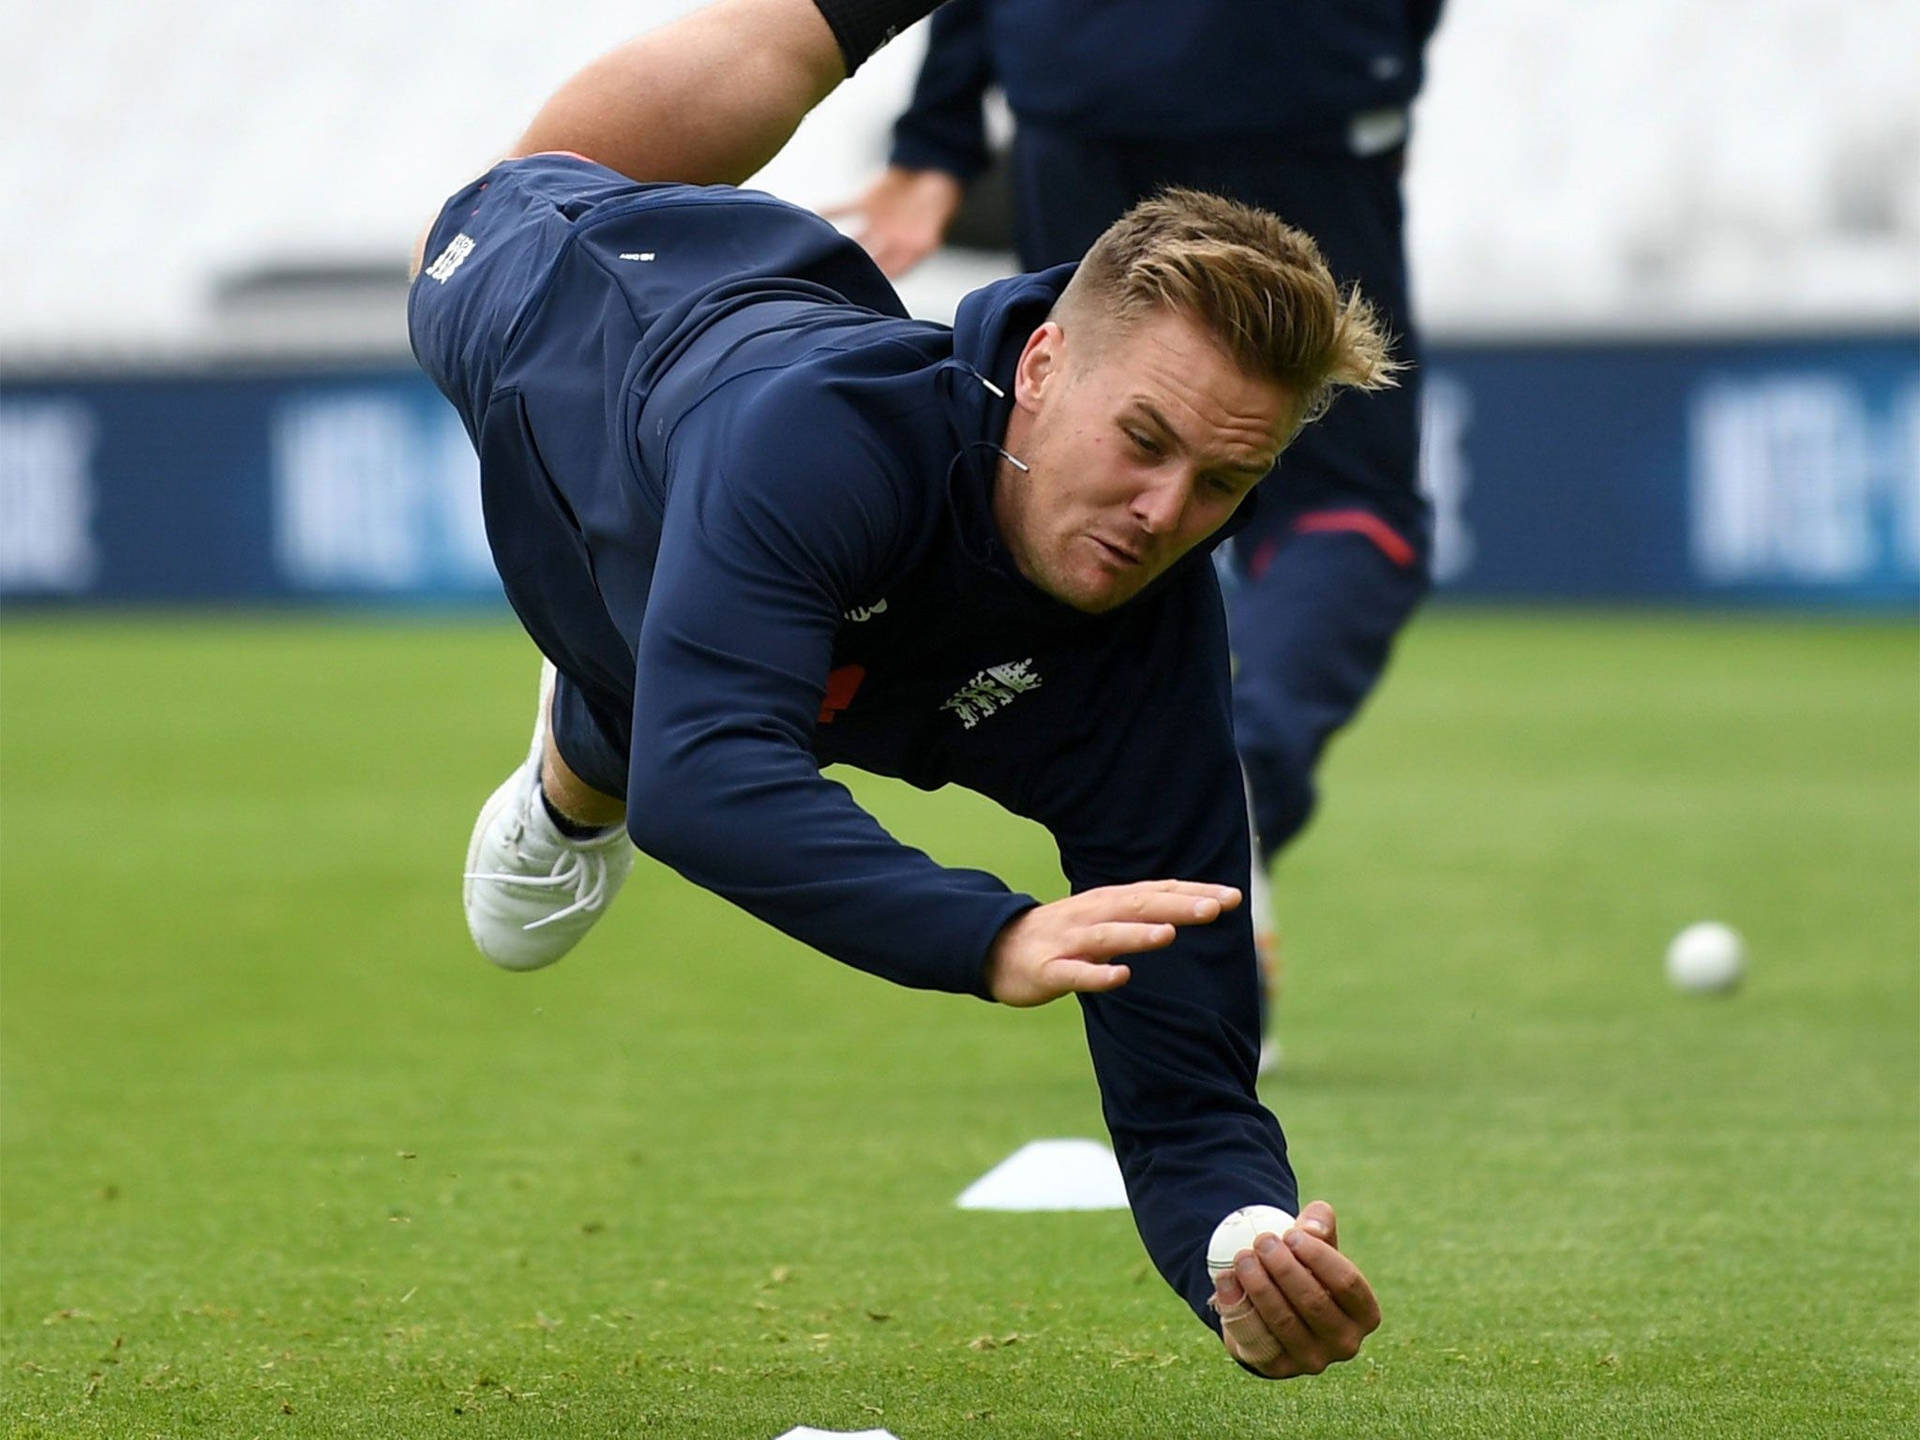 Jason Roy Diving For The Ball Background